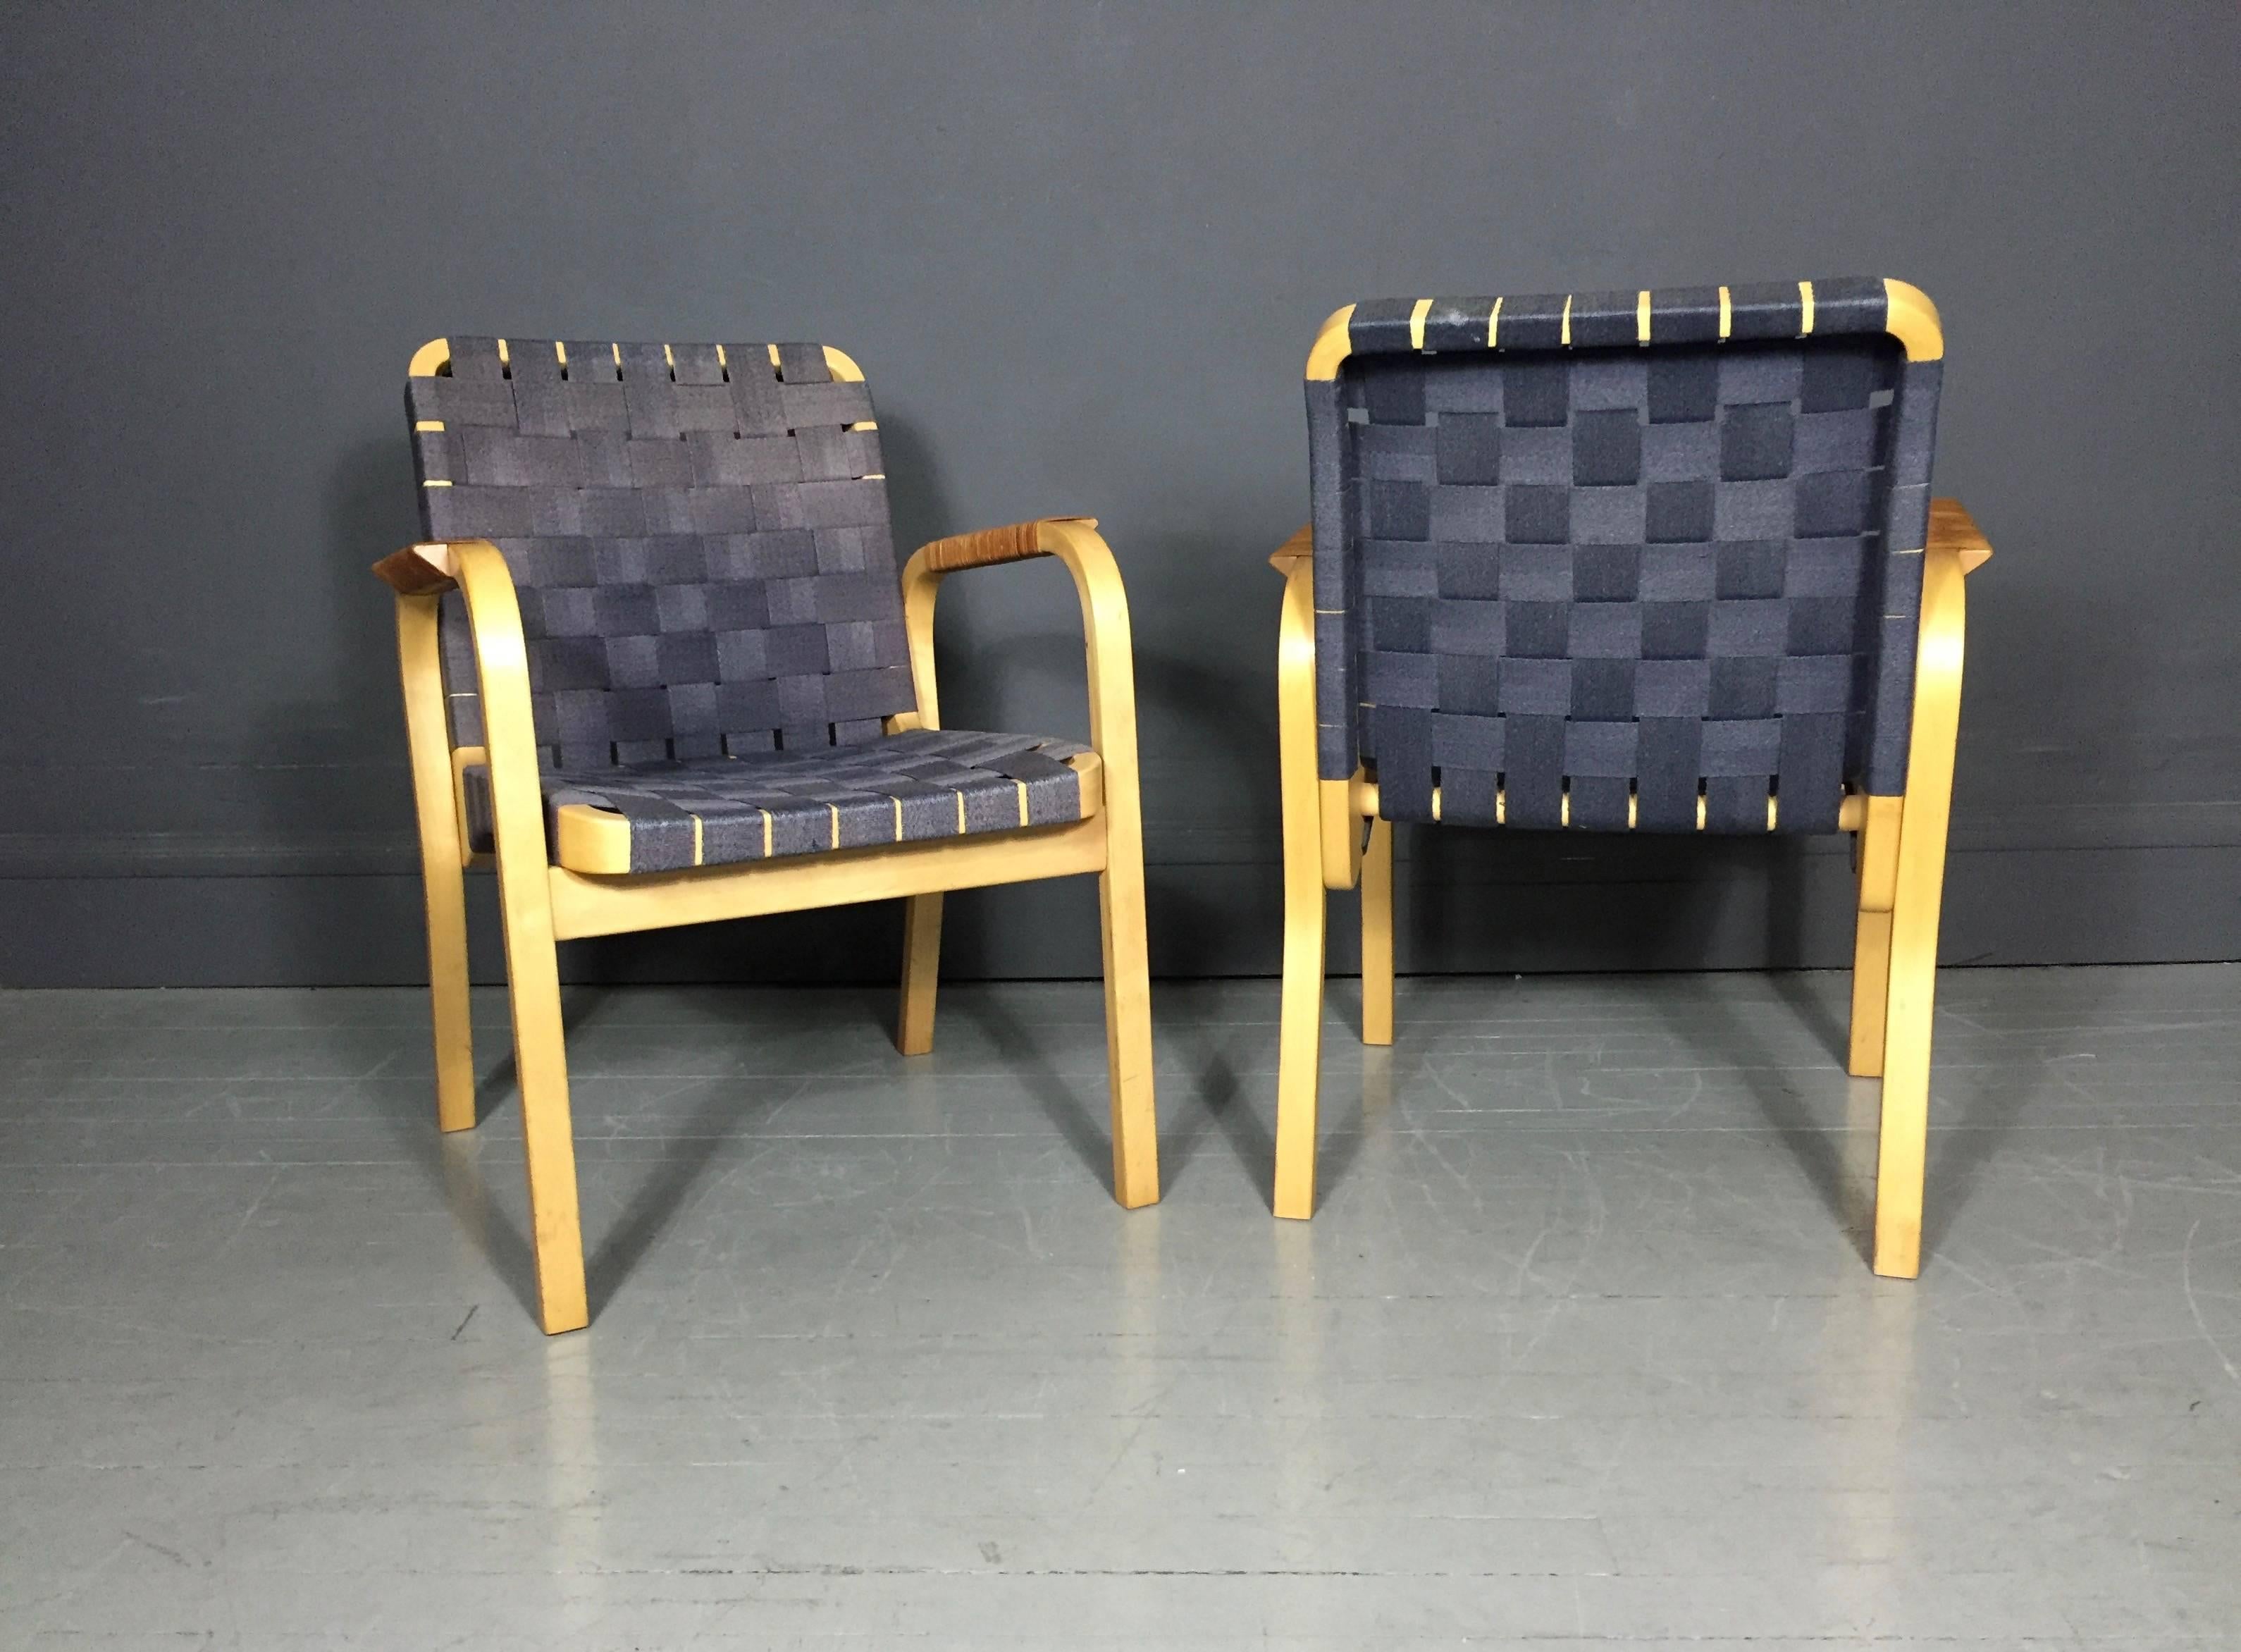 One of my favorite webbing colors in steel blue for the Alvar Aalto Model NV 45 armchair for Artek, designed in 1947. Laminated birch frame and exquisite organic cane wrapped arms, Finland, 20th century production. Two available, sold individually.